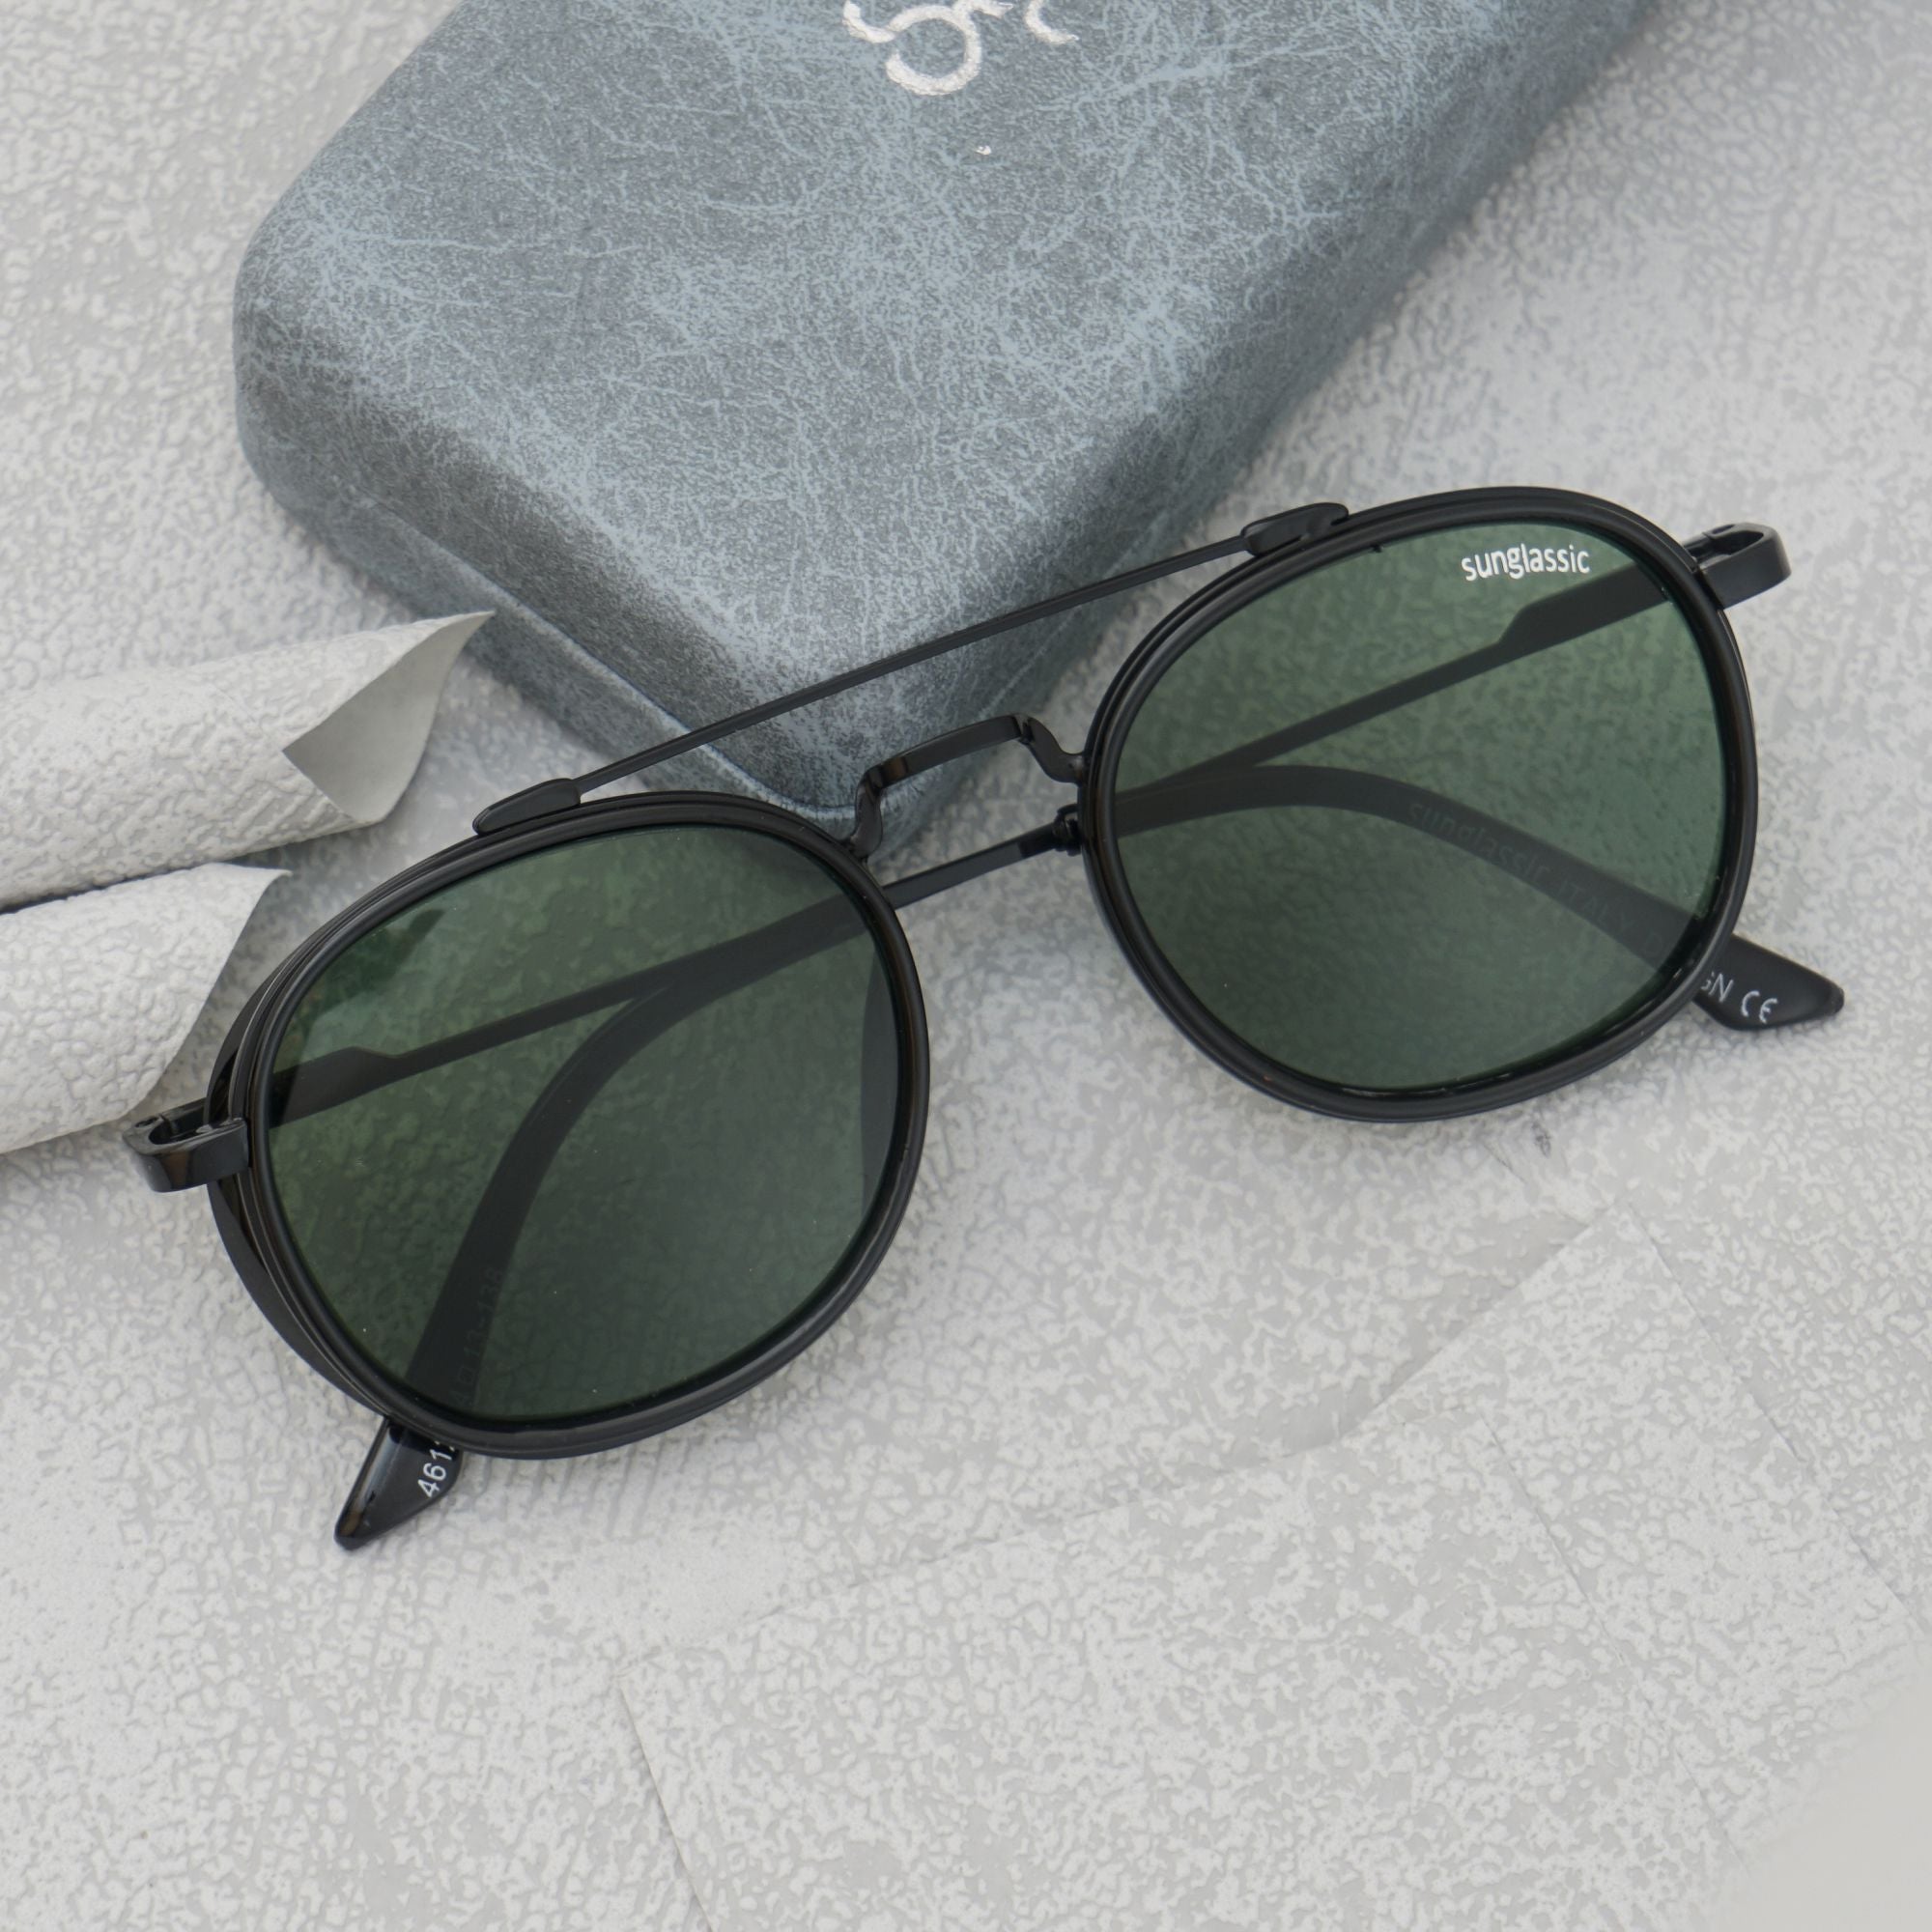 Green And Black Polarized SG4612 Metal Frame Round Sunglasses